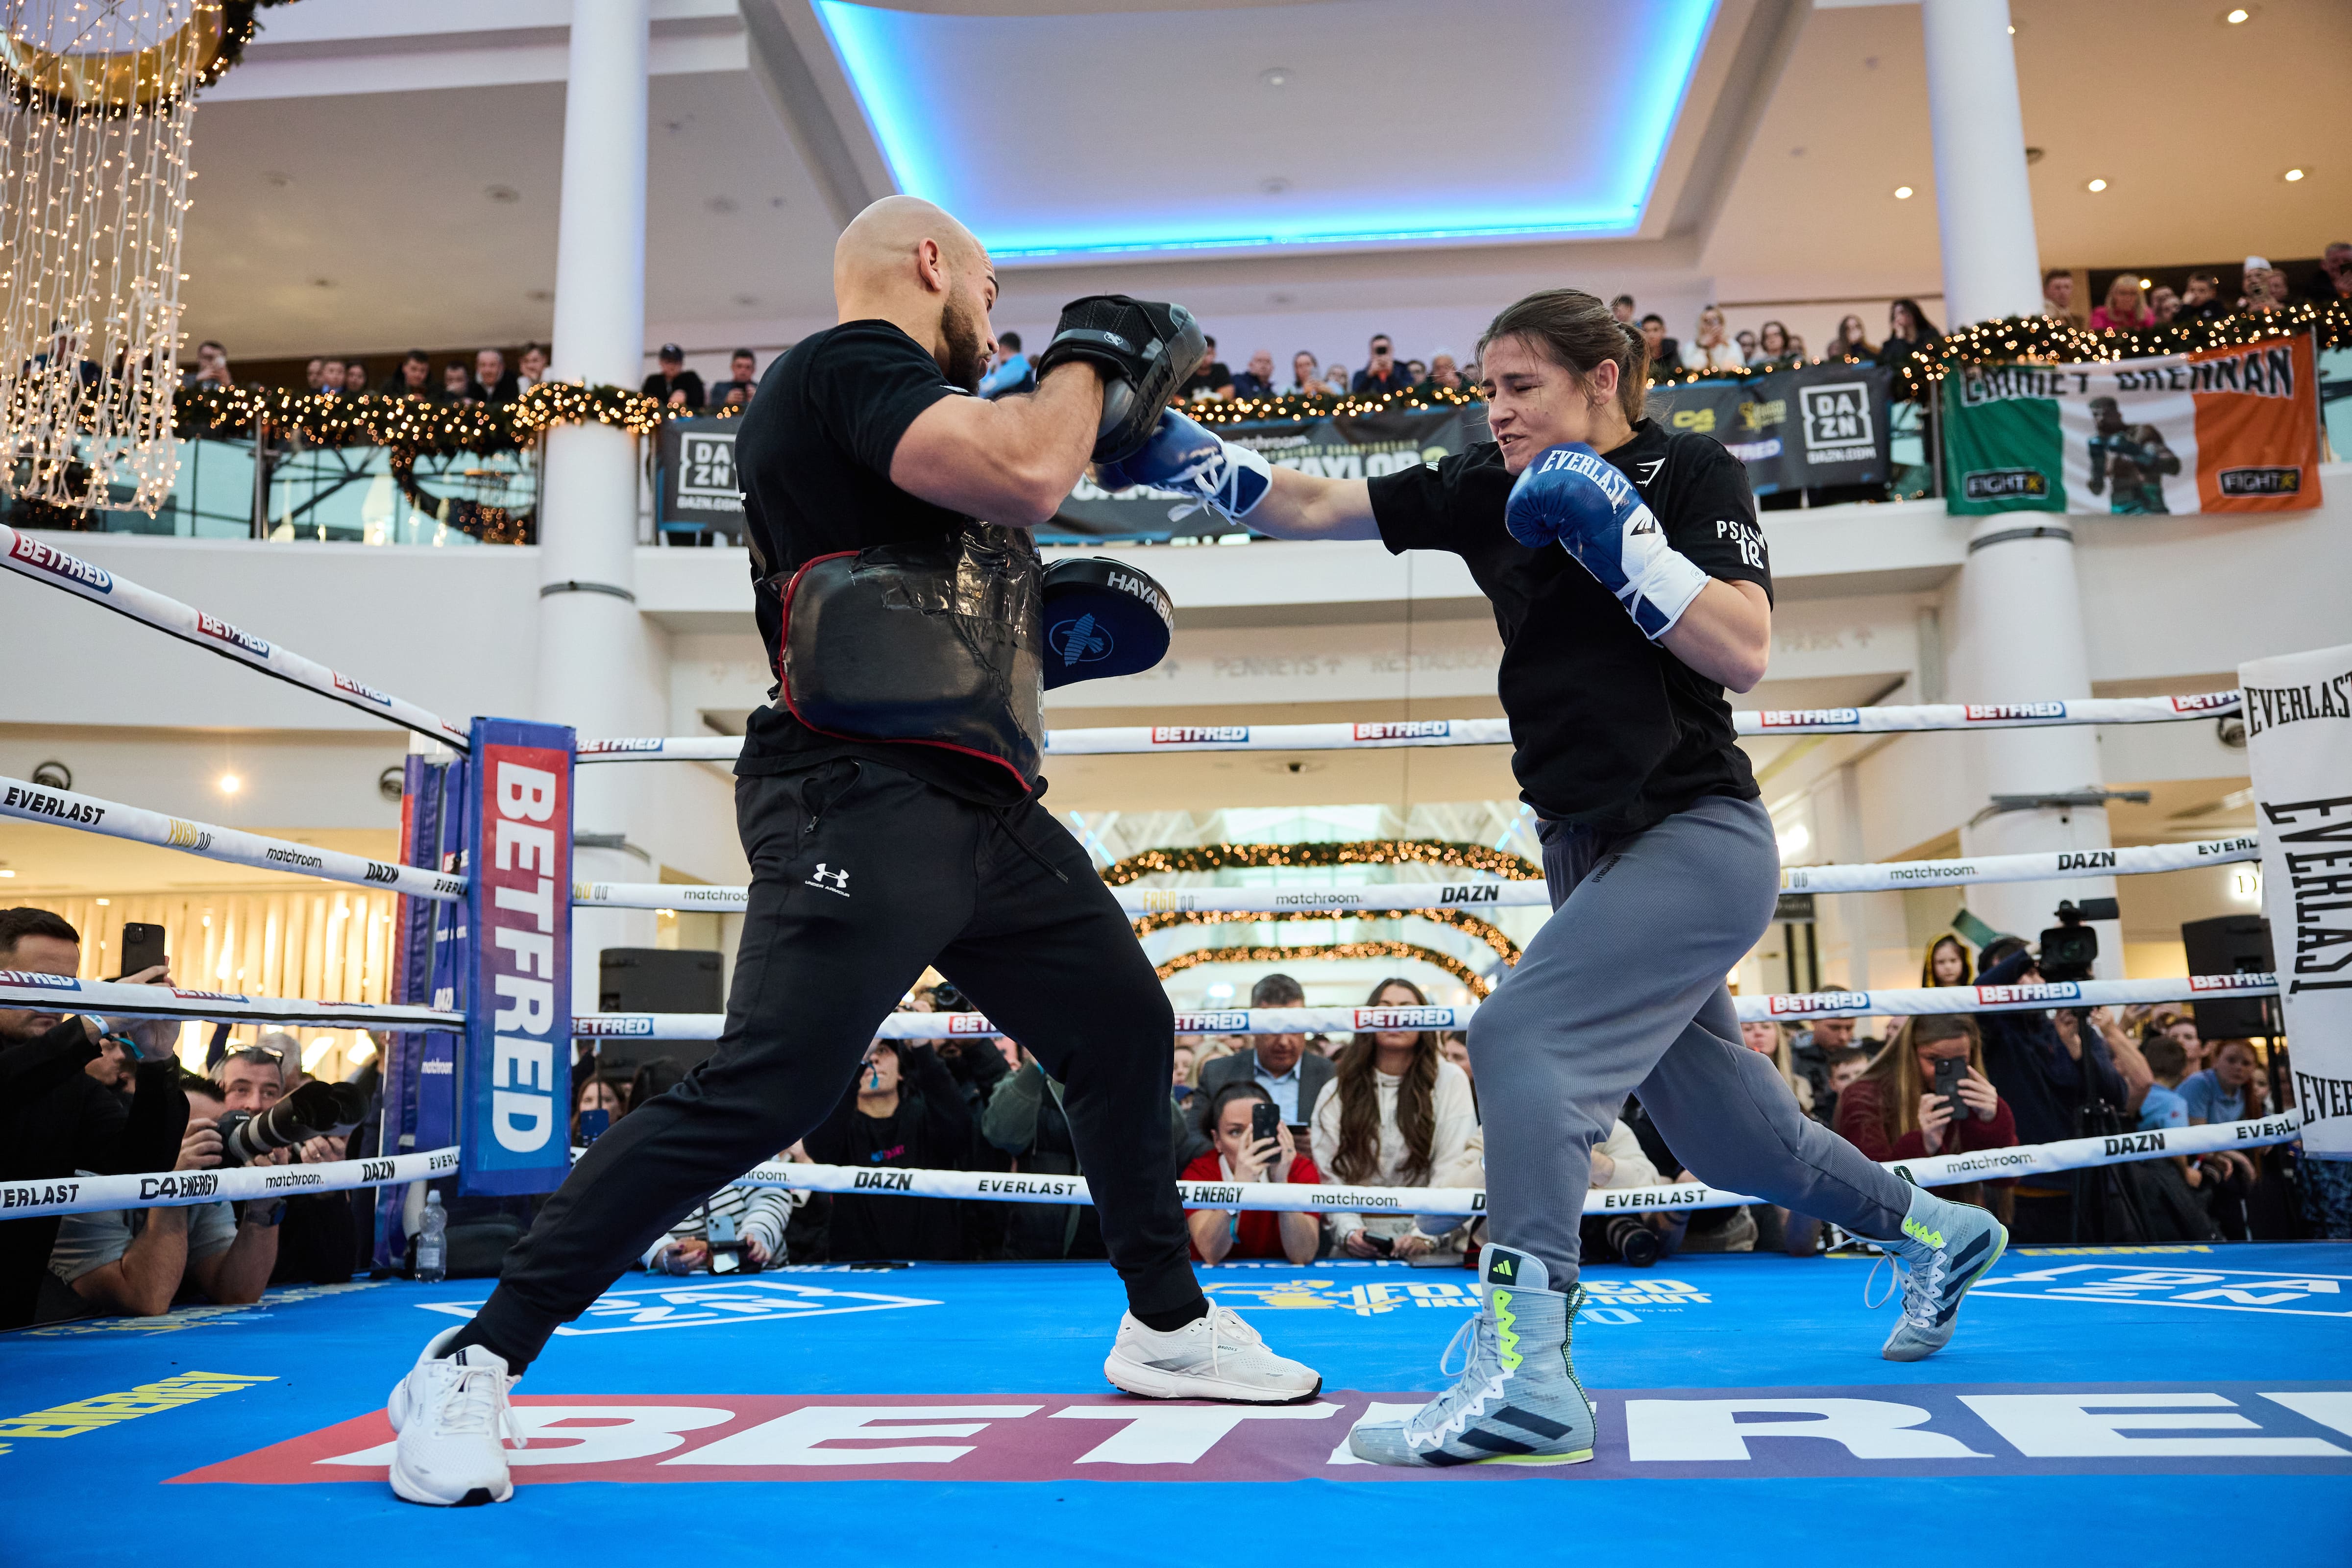 Katie Taylor on Cameron rematch: 'No other fight made sense to me'